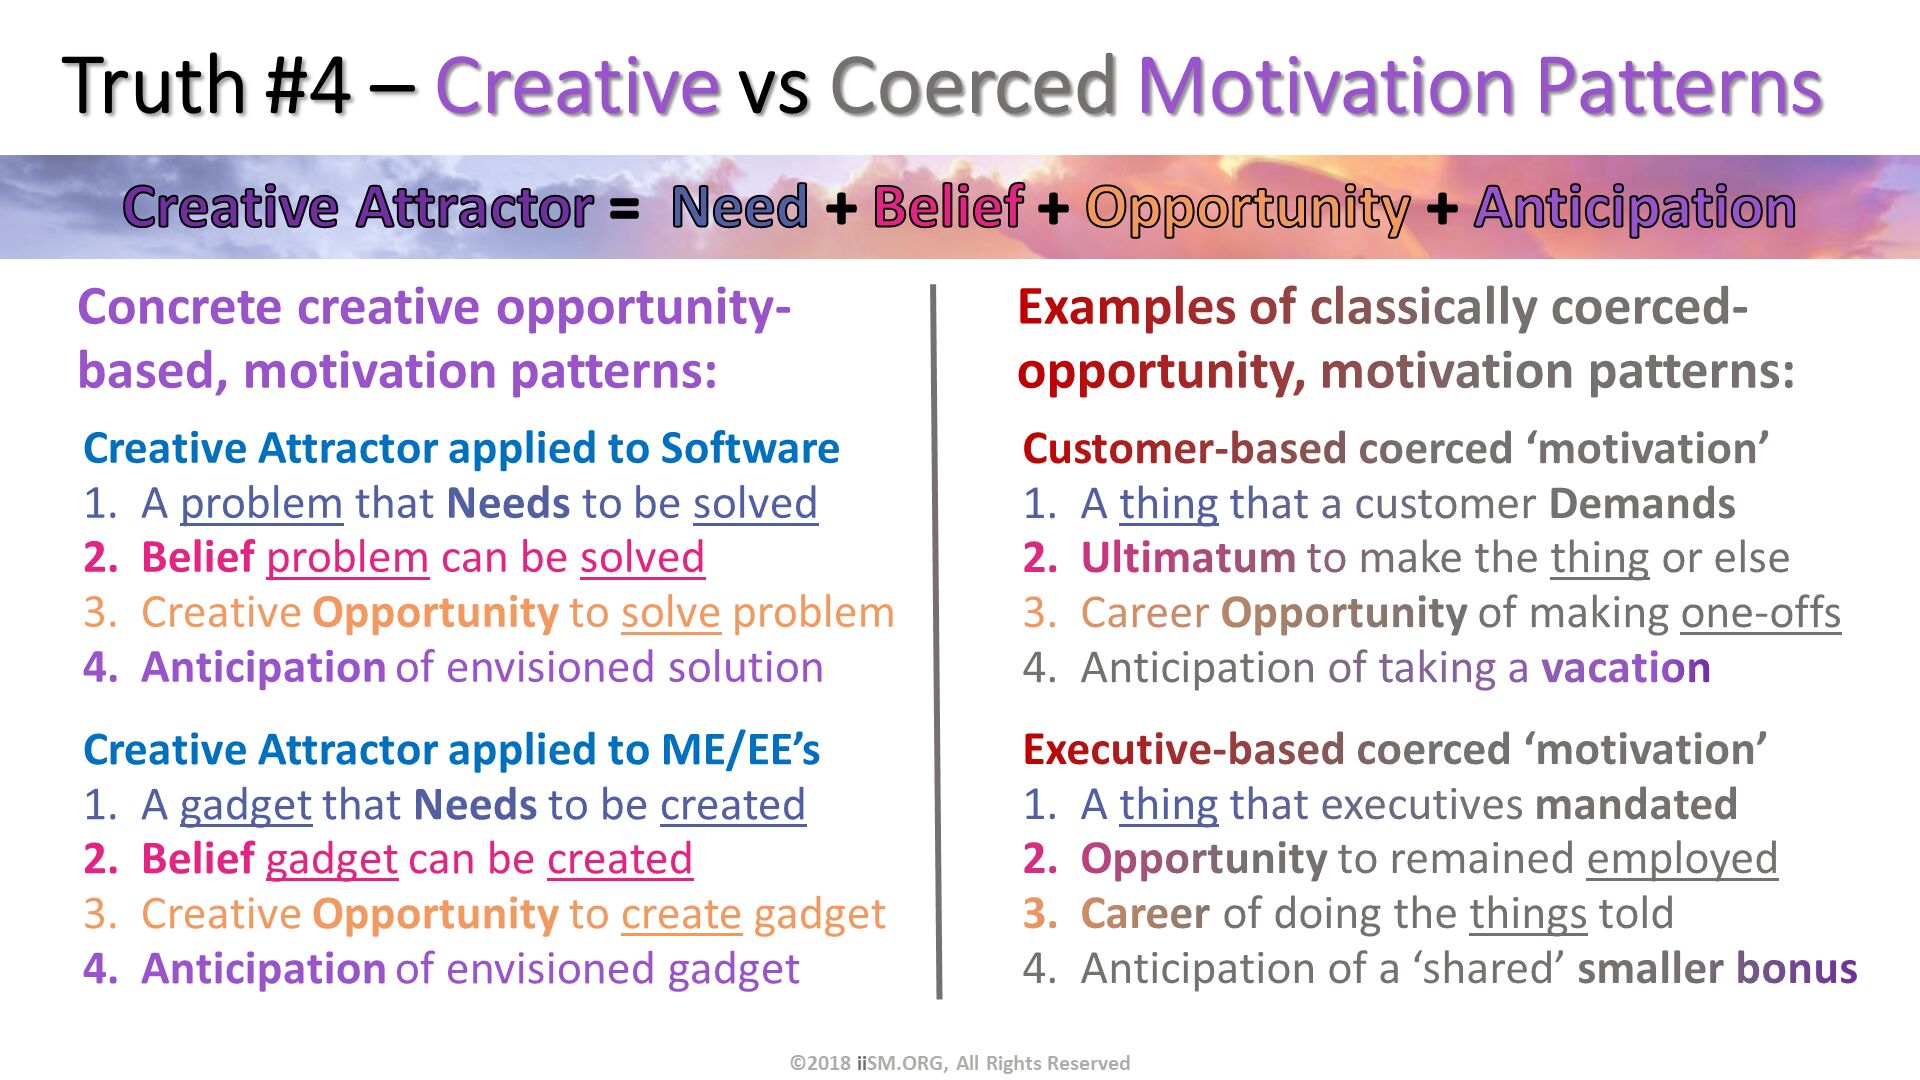 Truth #4 – Creative vs Coerced Motivation Patterns. Customer-based coerced ‘motivation’
A thing that a customer Demands
Ultimatum to make the thing or else 
Career Opportunity of making one-offs
Anticipation of taking a vacation. Creative Attractor applied to ME/EE’s
A gadget that Needs to be created
Belief gadget can be created
Creative Opportunity to create gadget
Anticipation of envisioned gadget. Creative Attractor applied to Software
A problem that Needs to be solved
Belief problem can be solved
Creative Opportunity to solve problem
Anticipation of envisioned solution. Executive-based coerced ‘motivation’
A thing that executives mandated
Opportunity to remained employed
Career of doing the things told
Anticipation of a ‘shared’ smaller bonus. Concrete creative opportunity-based, motivation patterns:. ©2018 iiSM.ORG, All Rights Reserved. Examples of classically coerced-opportunity, motivation patterns:. 